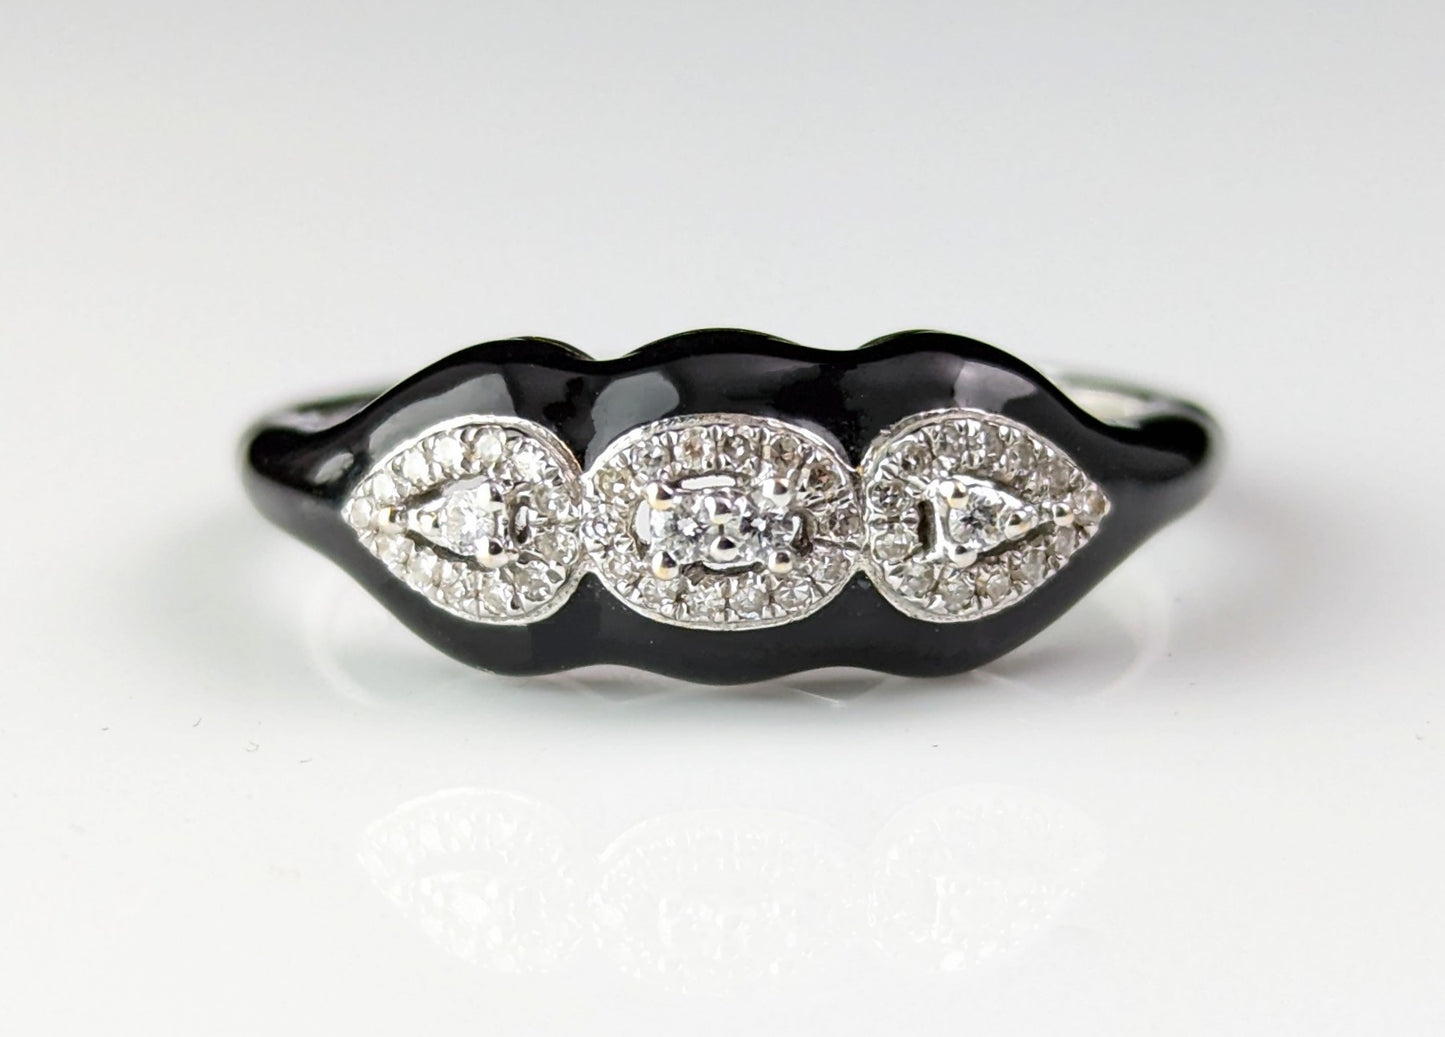 Black enamel and Diamond ring, 18ct white gold, Contemporary